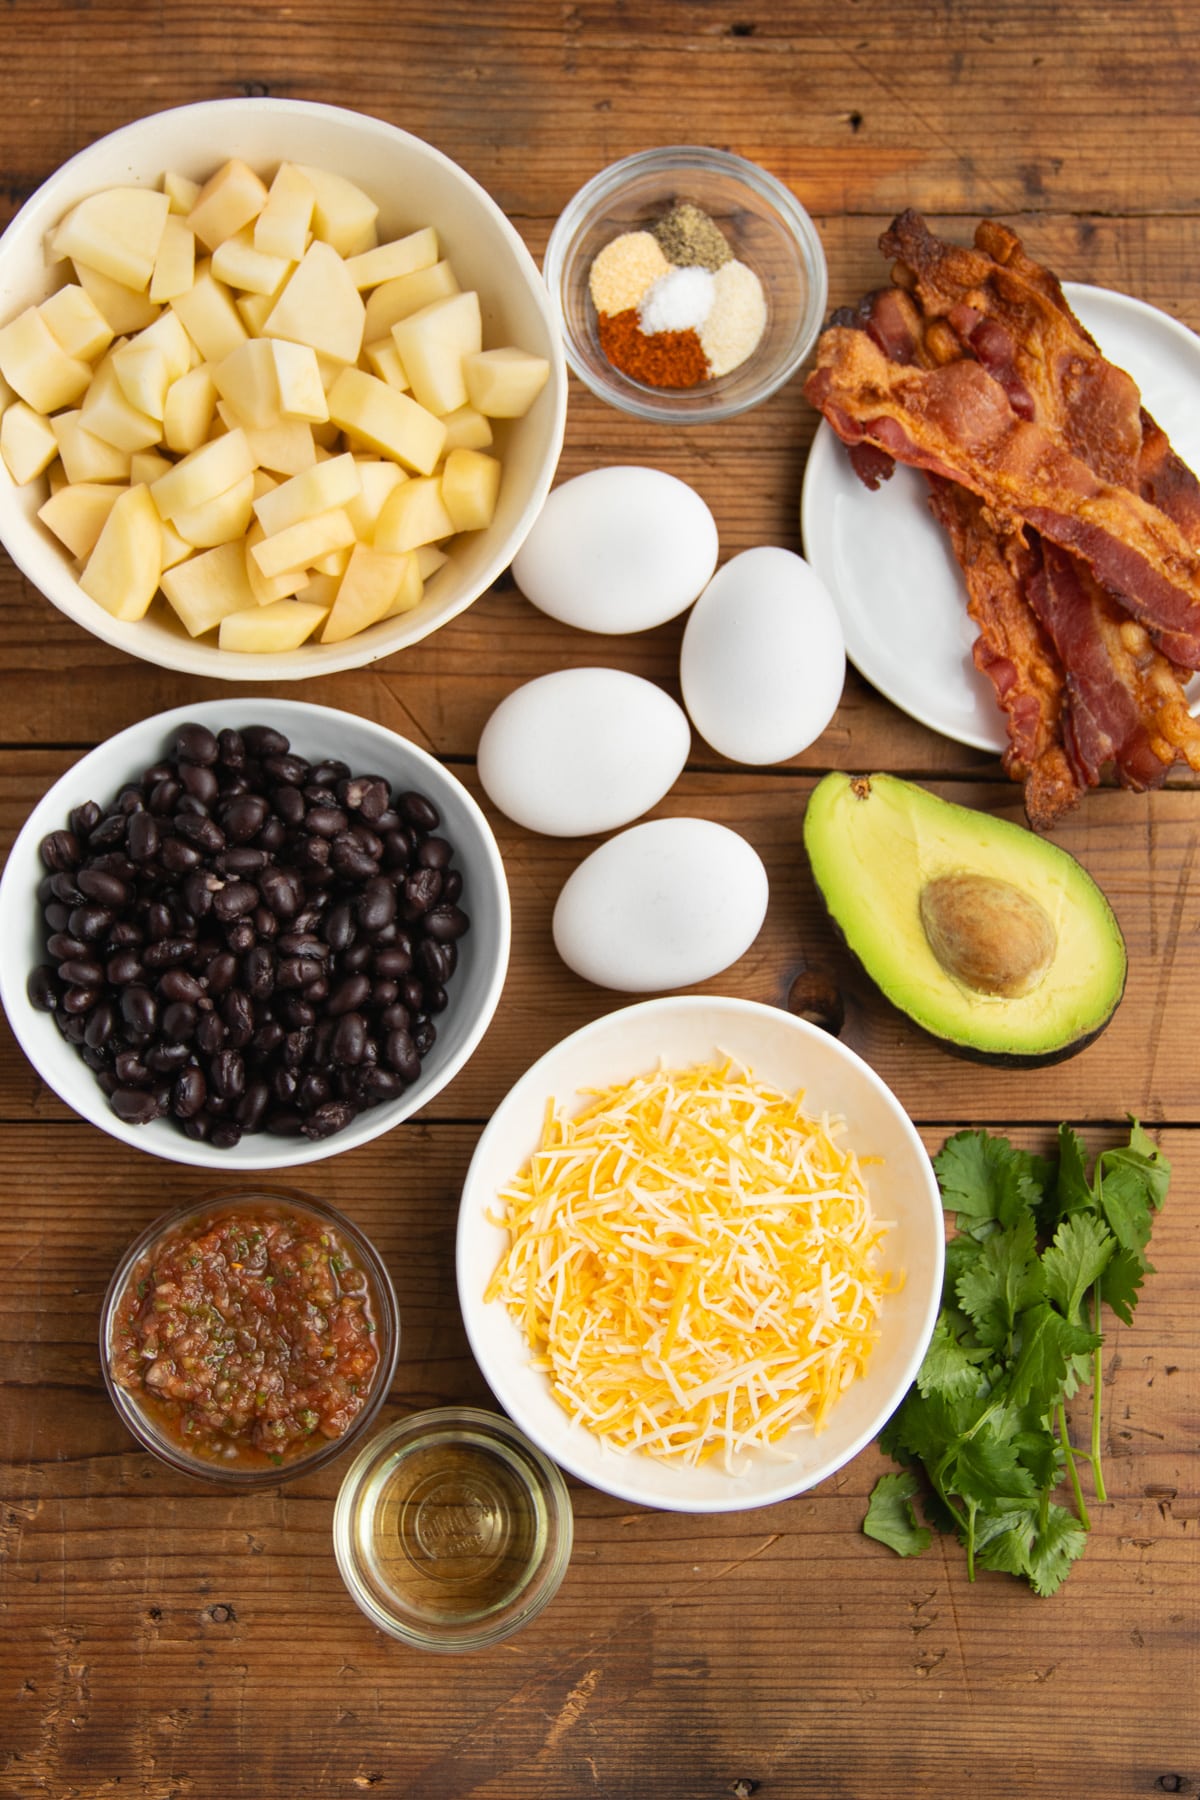 This is a picture of all the ingredients needed to make these breakfast bowls.